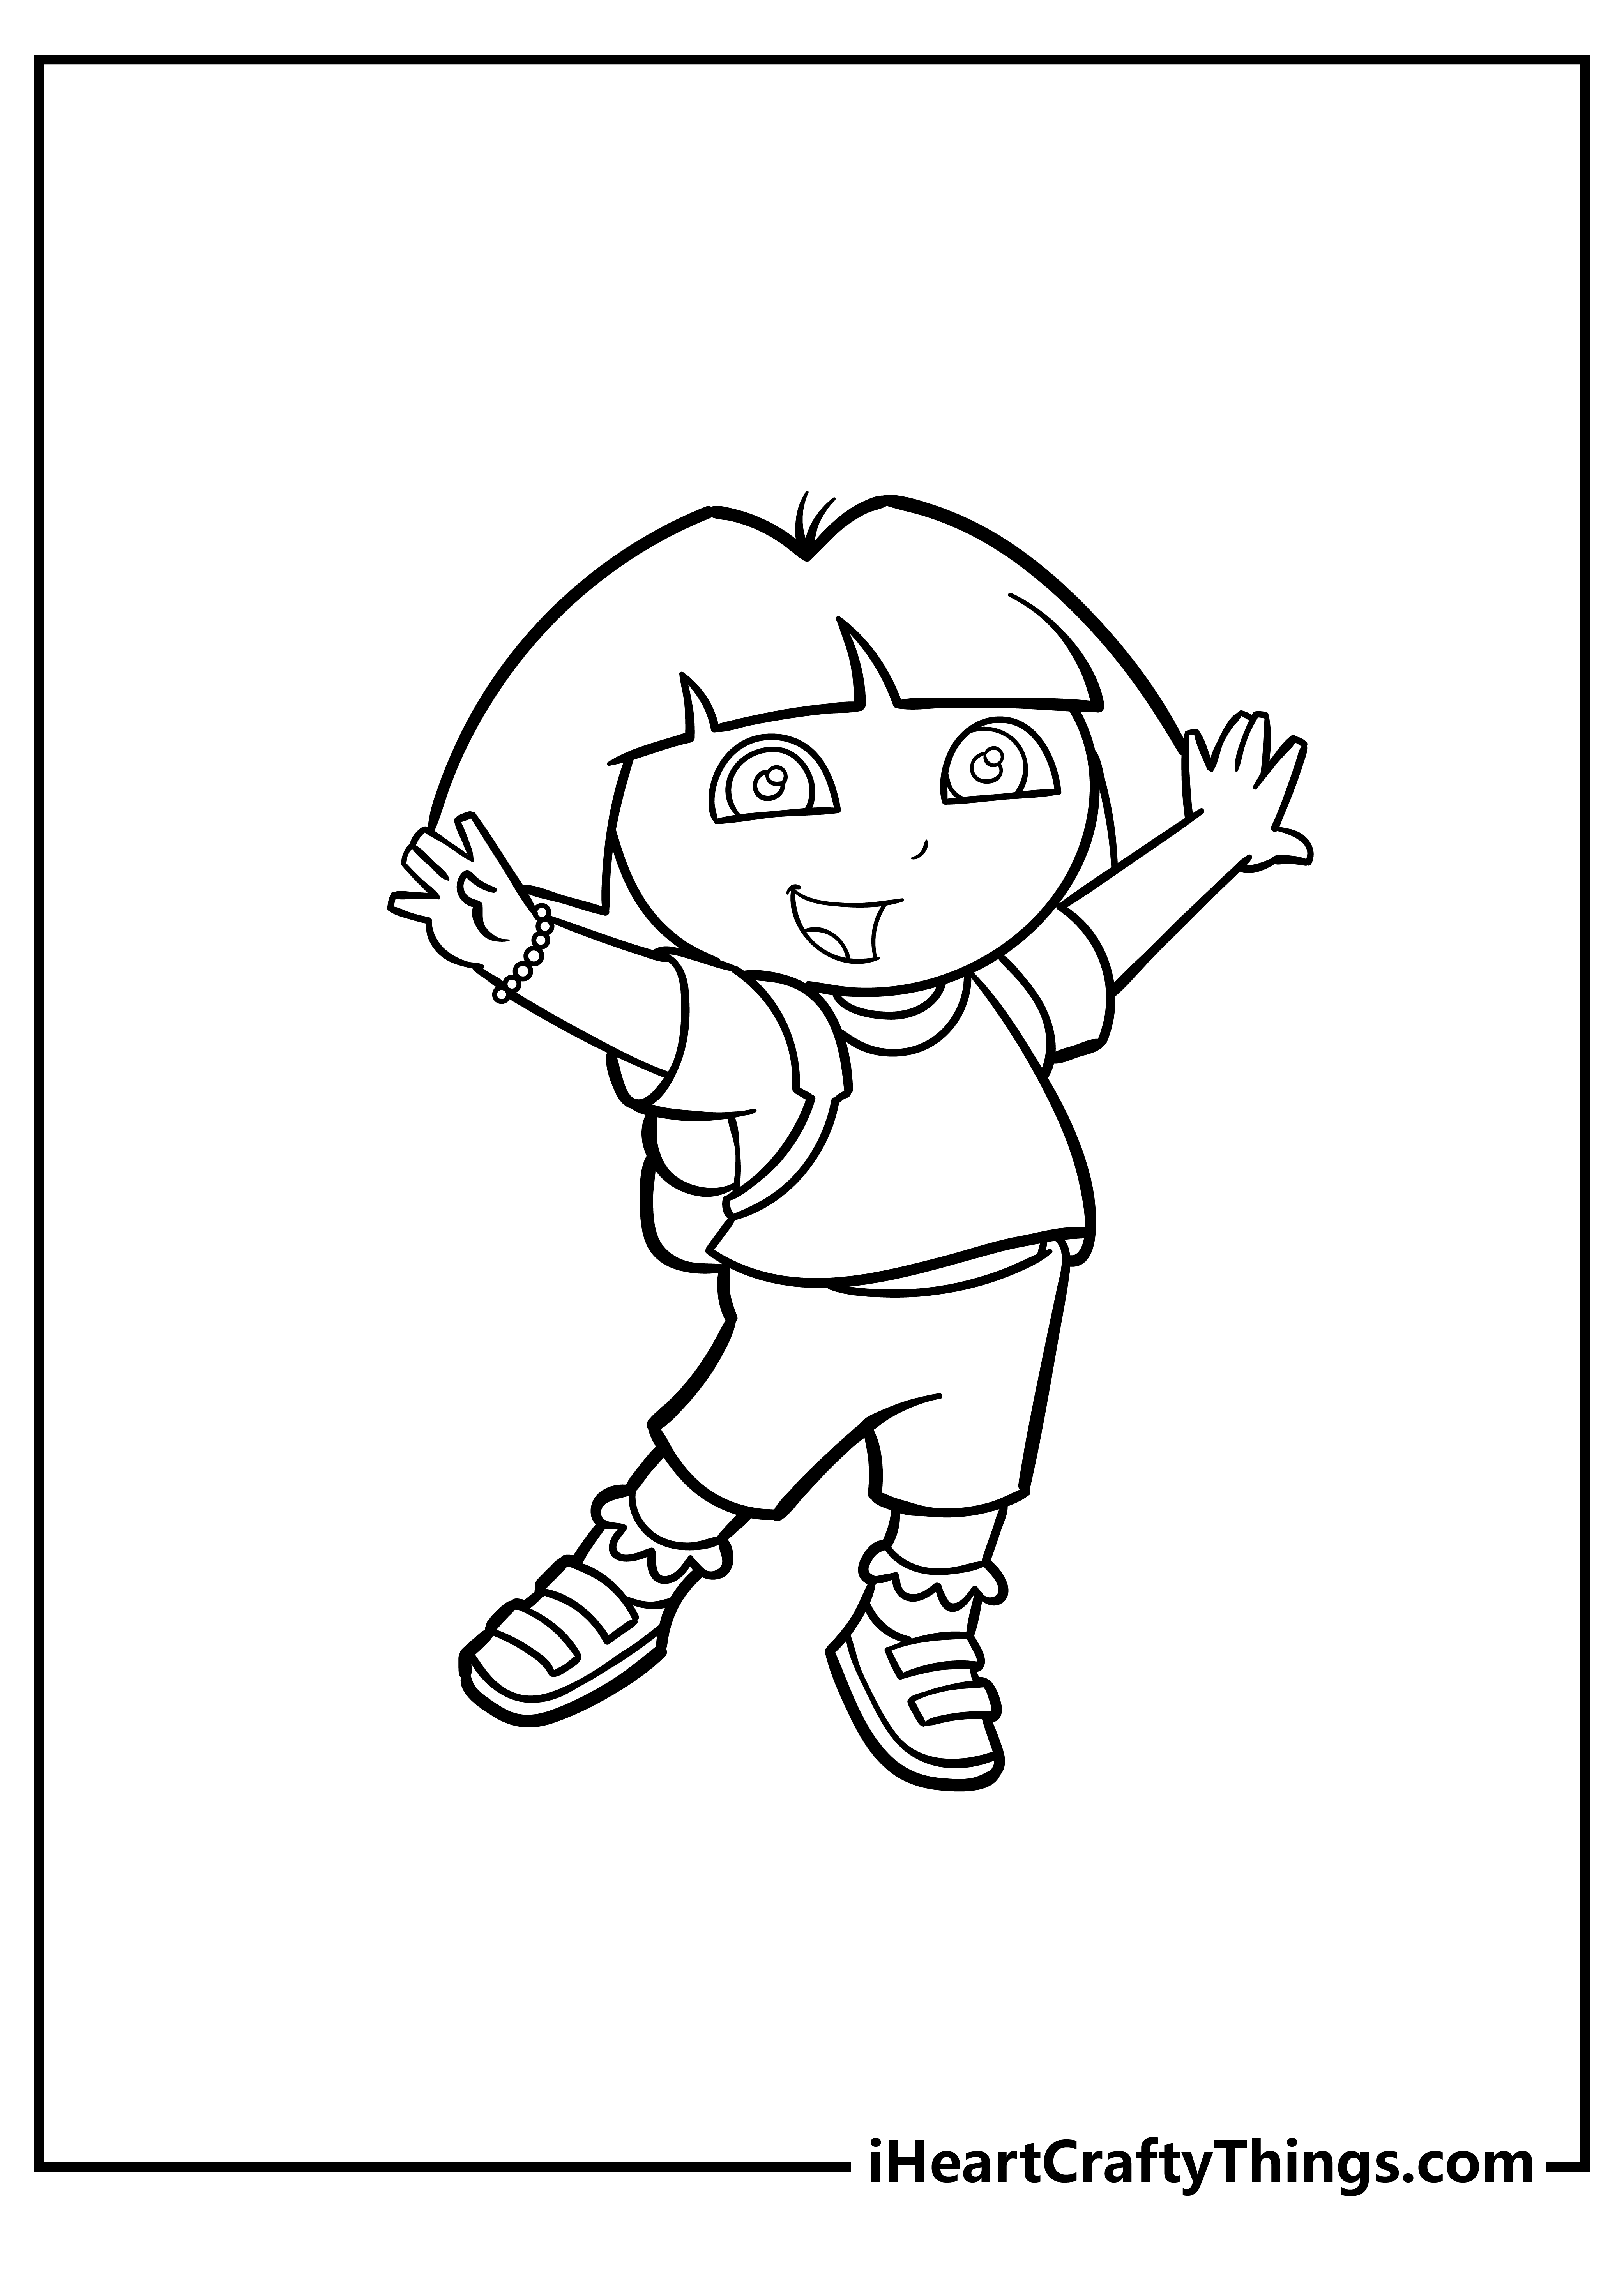 Dora Coloring Pages for kids free download